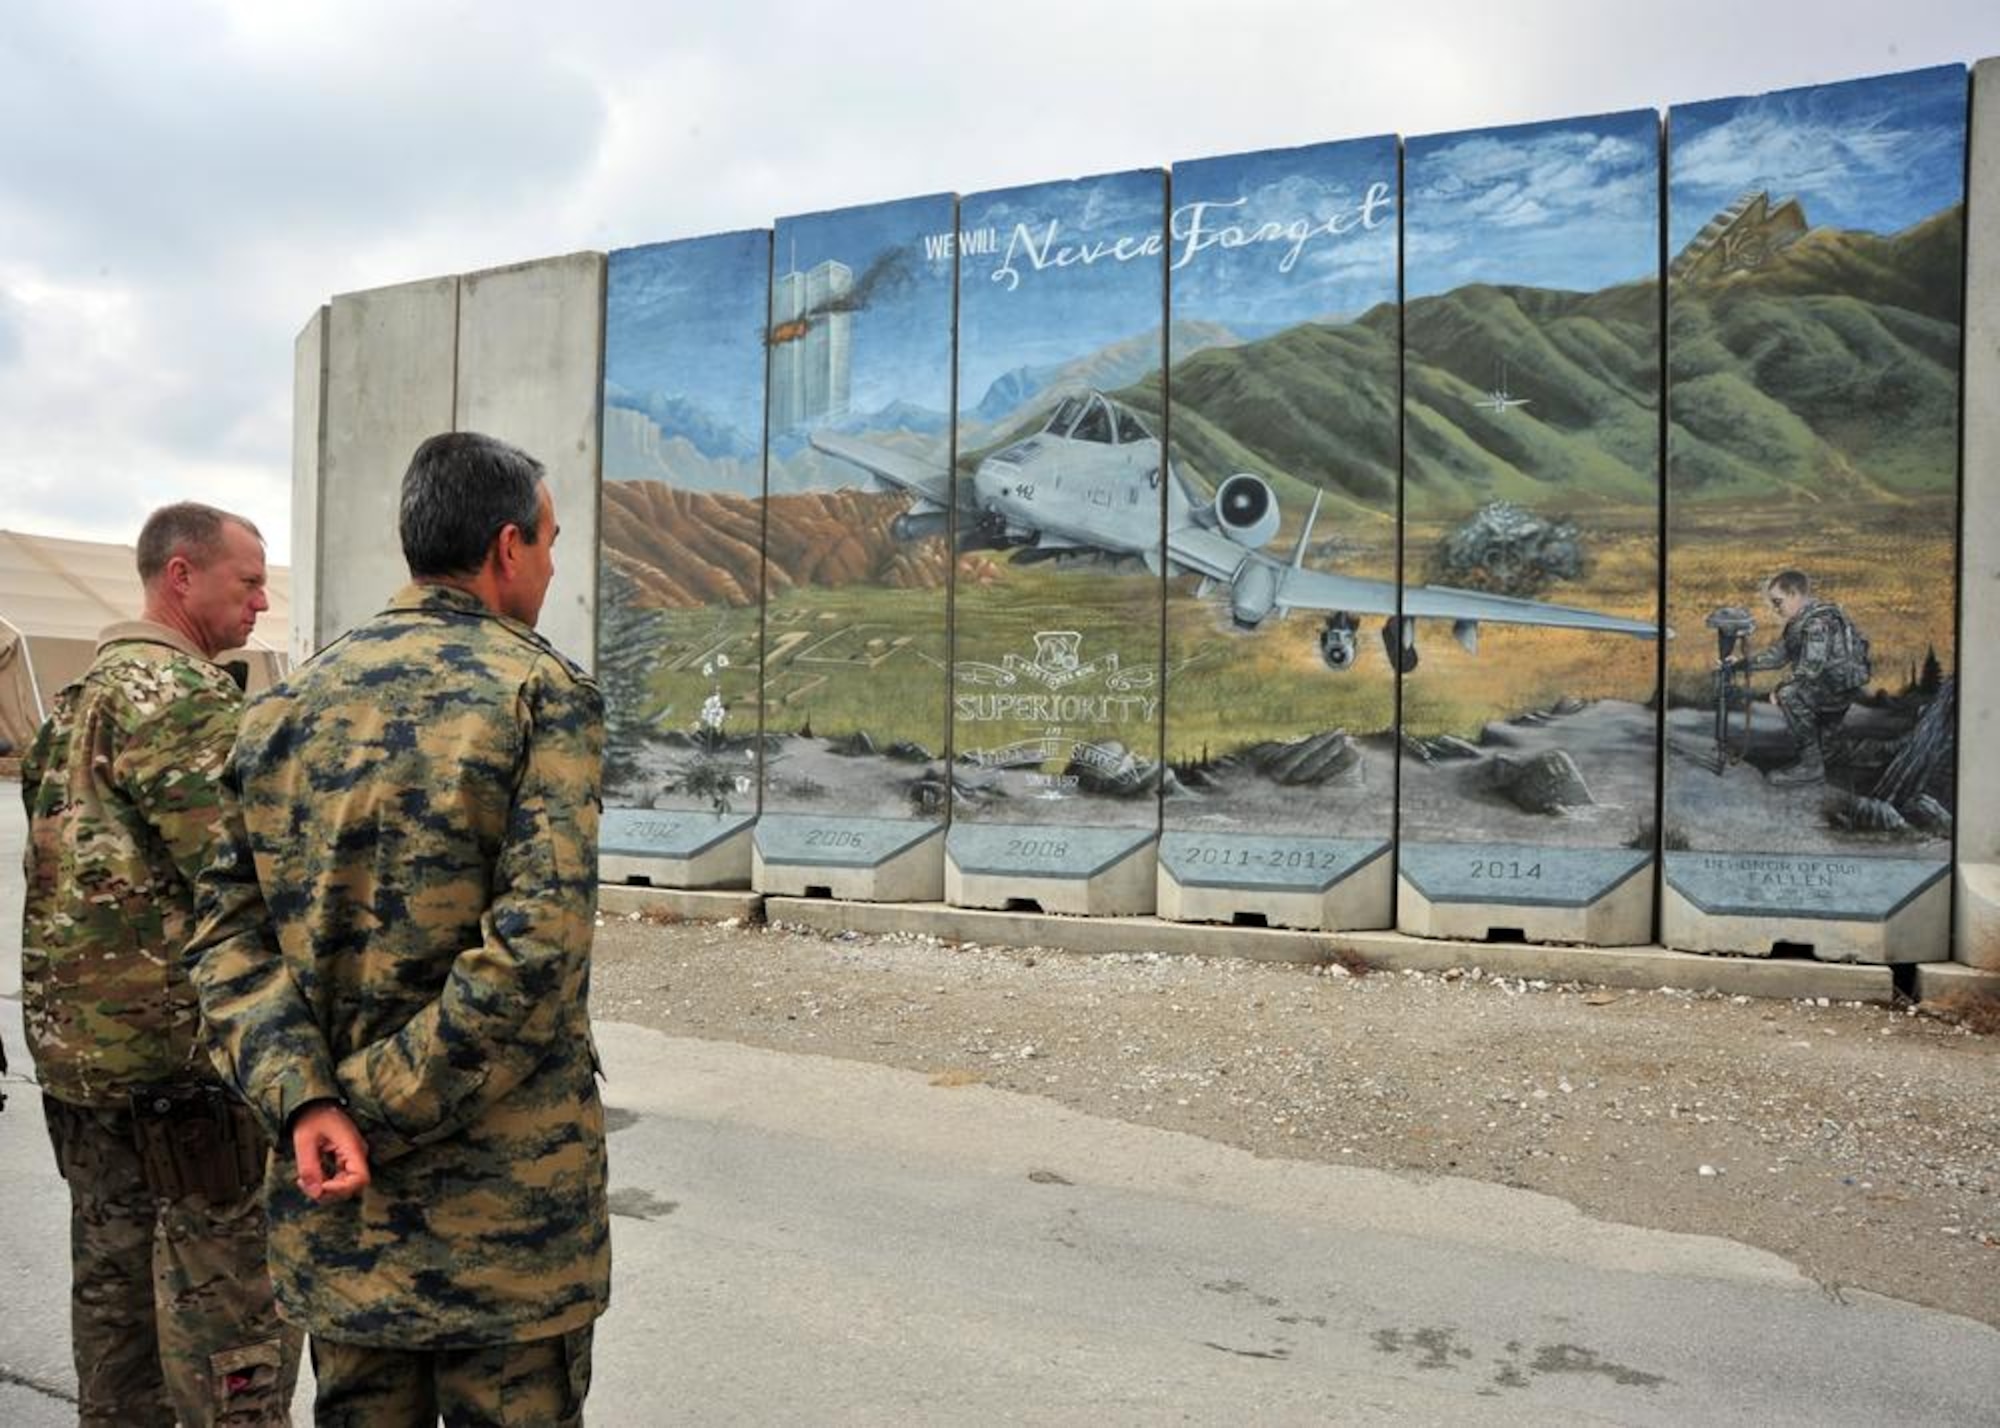 Two coalition service members admire a mural painted at a deployed location by Staff Sgt. Omar, 432nd Wing sensor operator in training at Creech Air Force Base, Nevada. The painting depicts an A-10 Thunderbolt providing close air support in 2014. On the left, the twin towers burn next to the words, “we will never forget,” to symbolize the events of September 11, 2001. On the right, Omar depicted one of his wingmen, an Airman holding a battle cross to commemorate fallen soldiers. (Courtesy Photo)